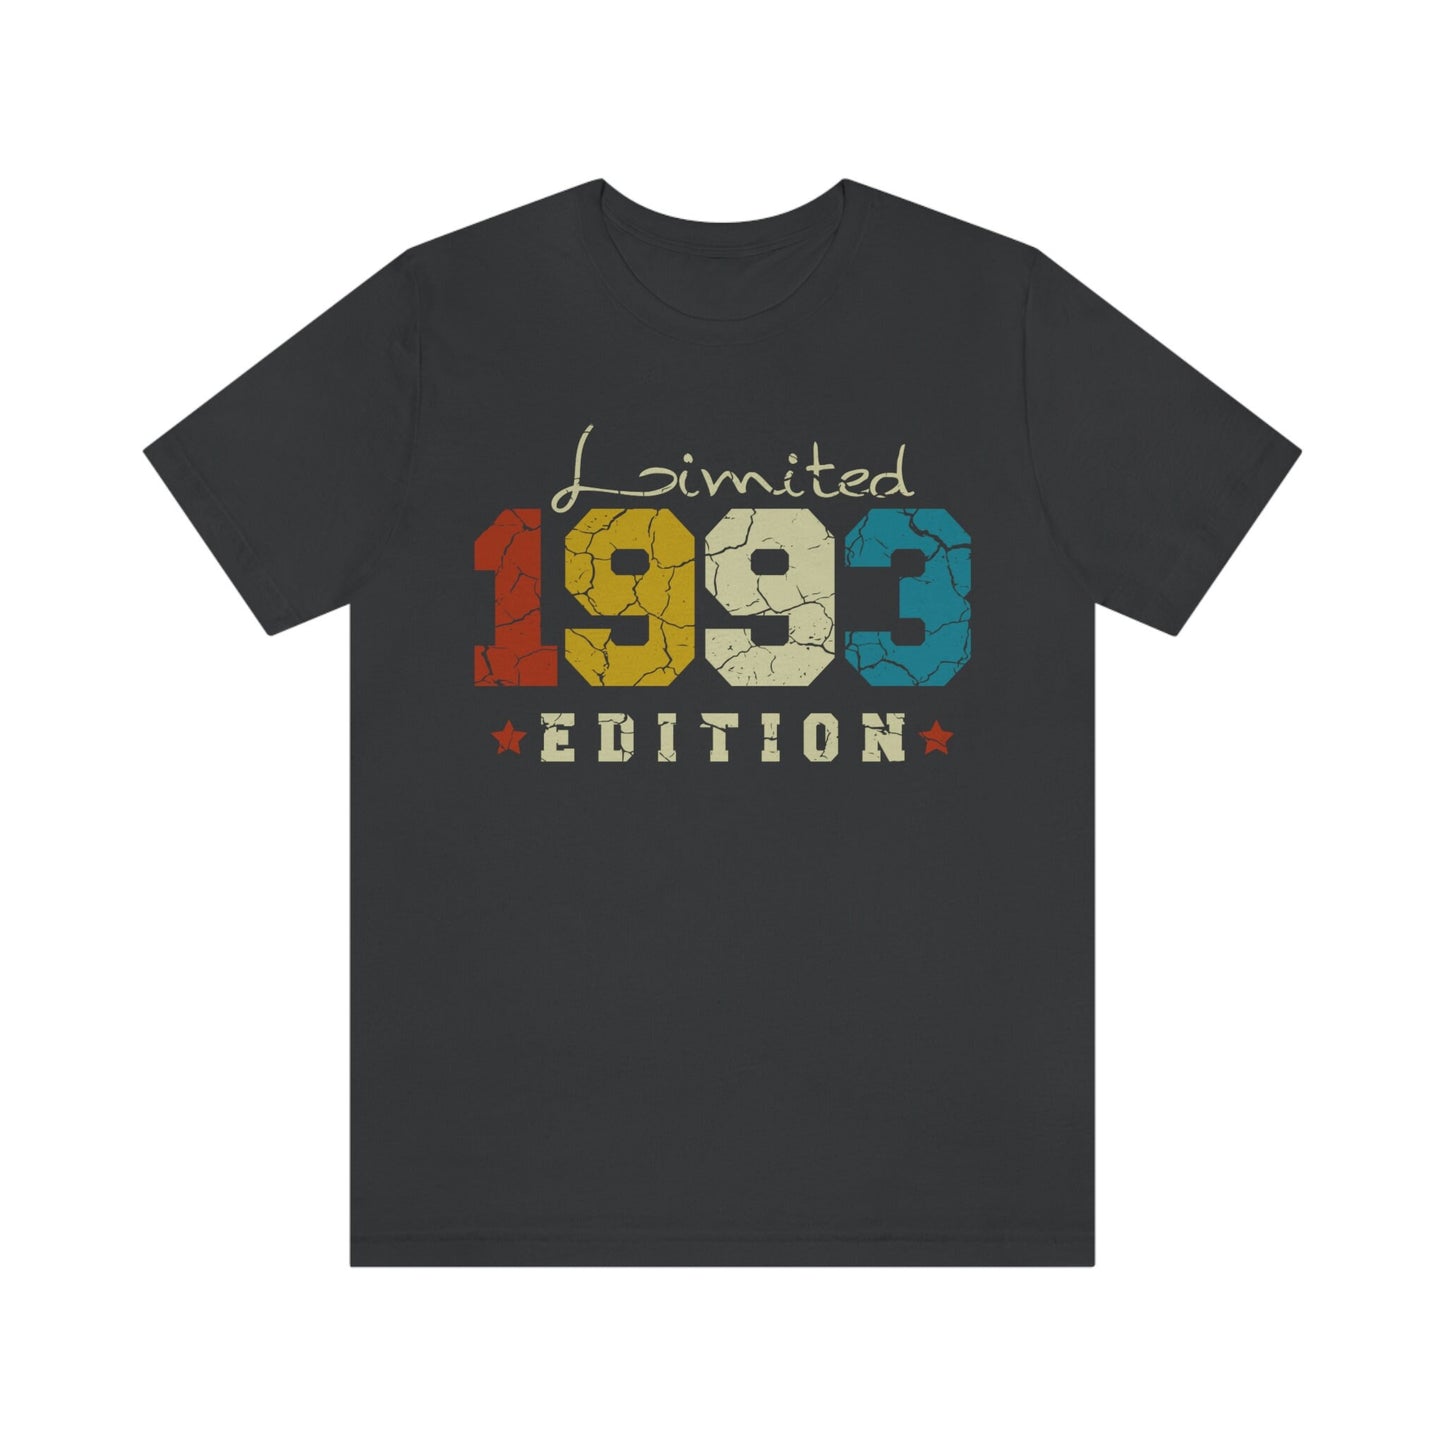 Limited 1993 Edition birthday gift t-shirt for women or men,  shirt for wife or husband